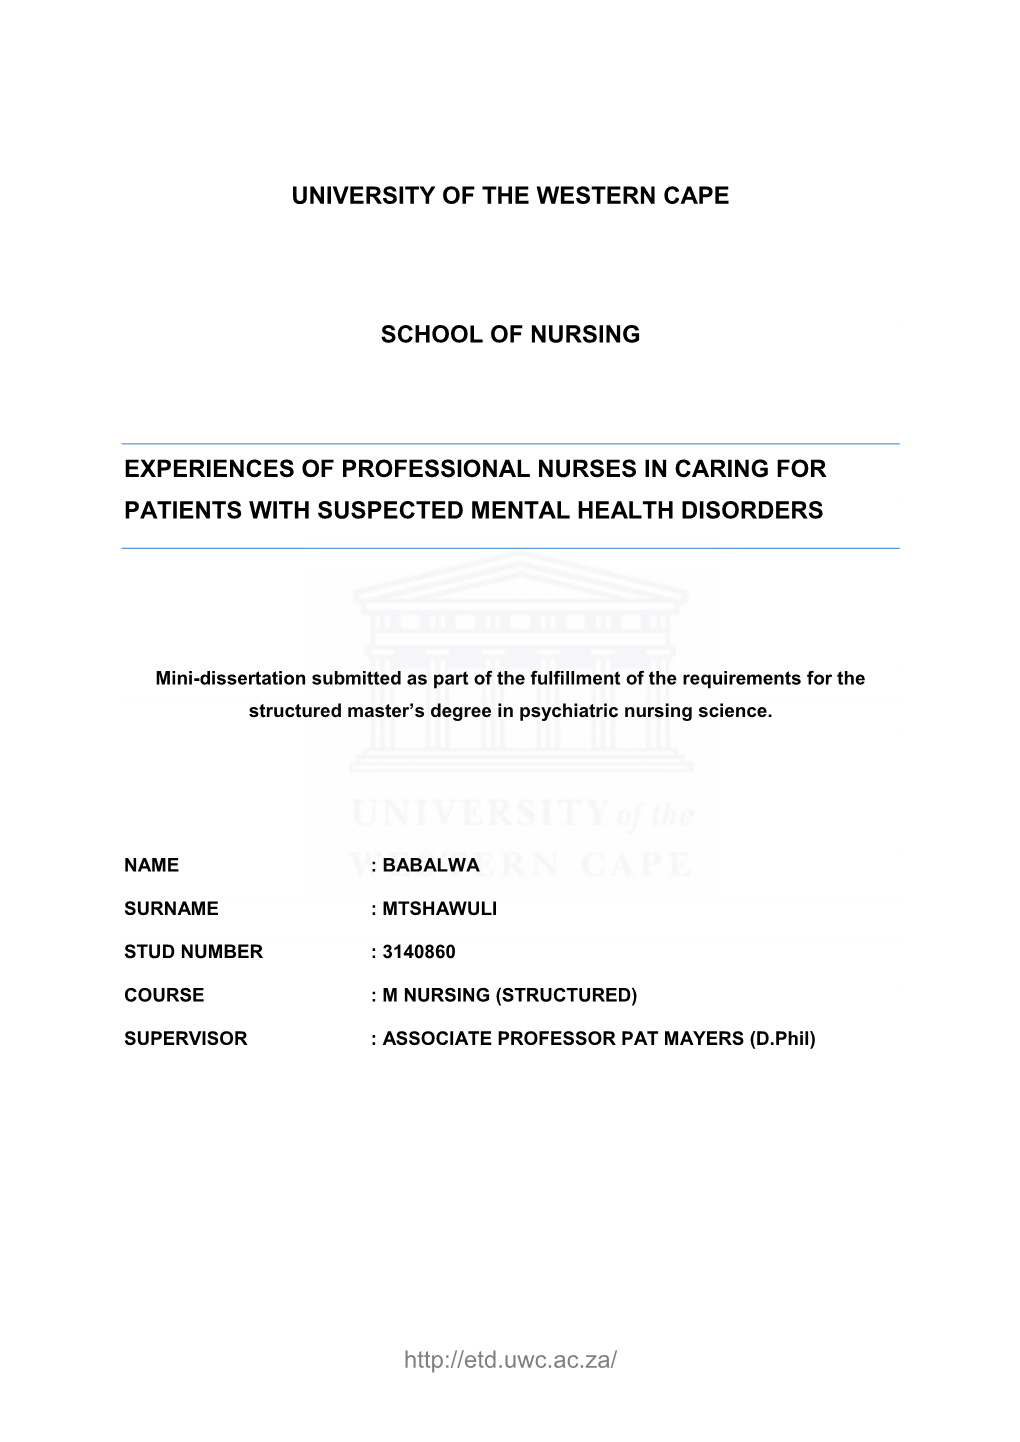 Experiences of Professional Nurses in Caring for Patients with Suspected Mental Health Disorders